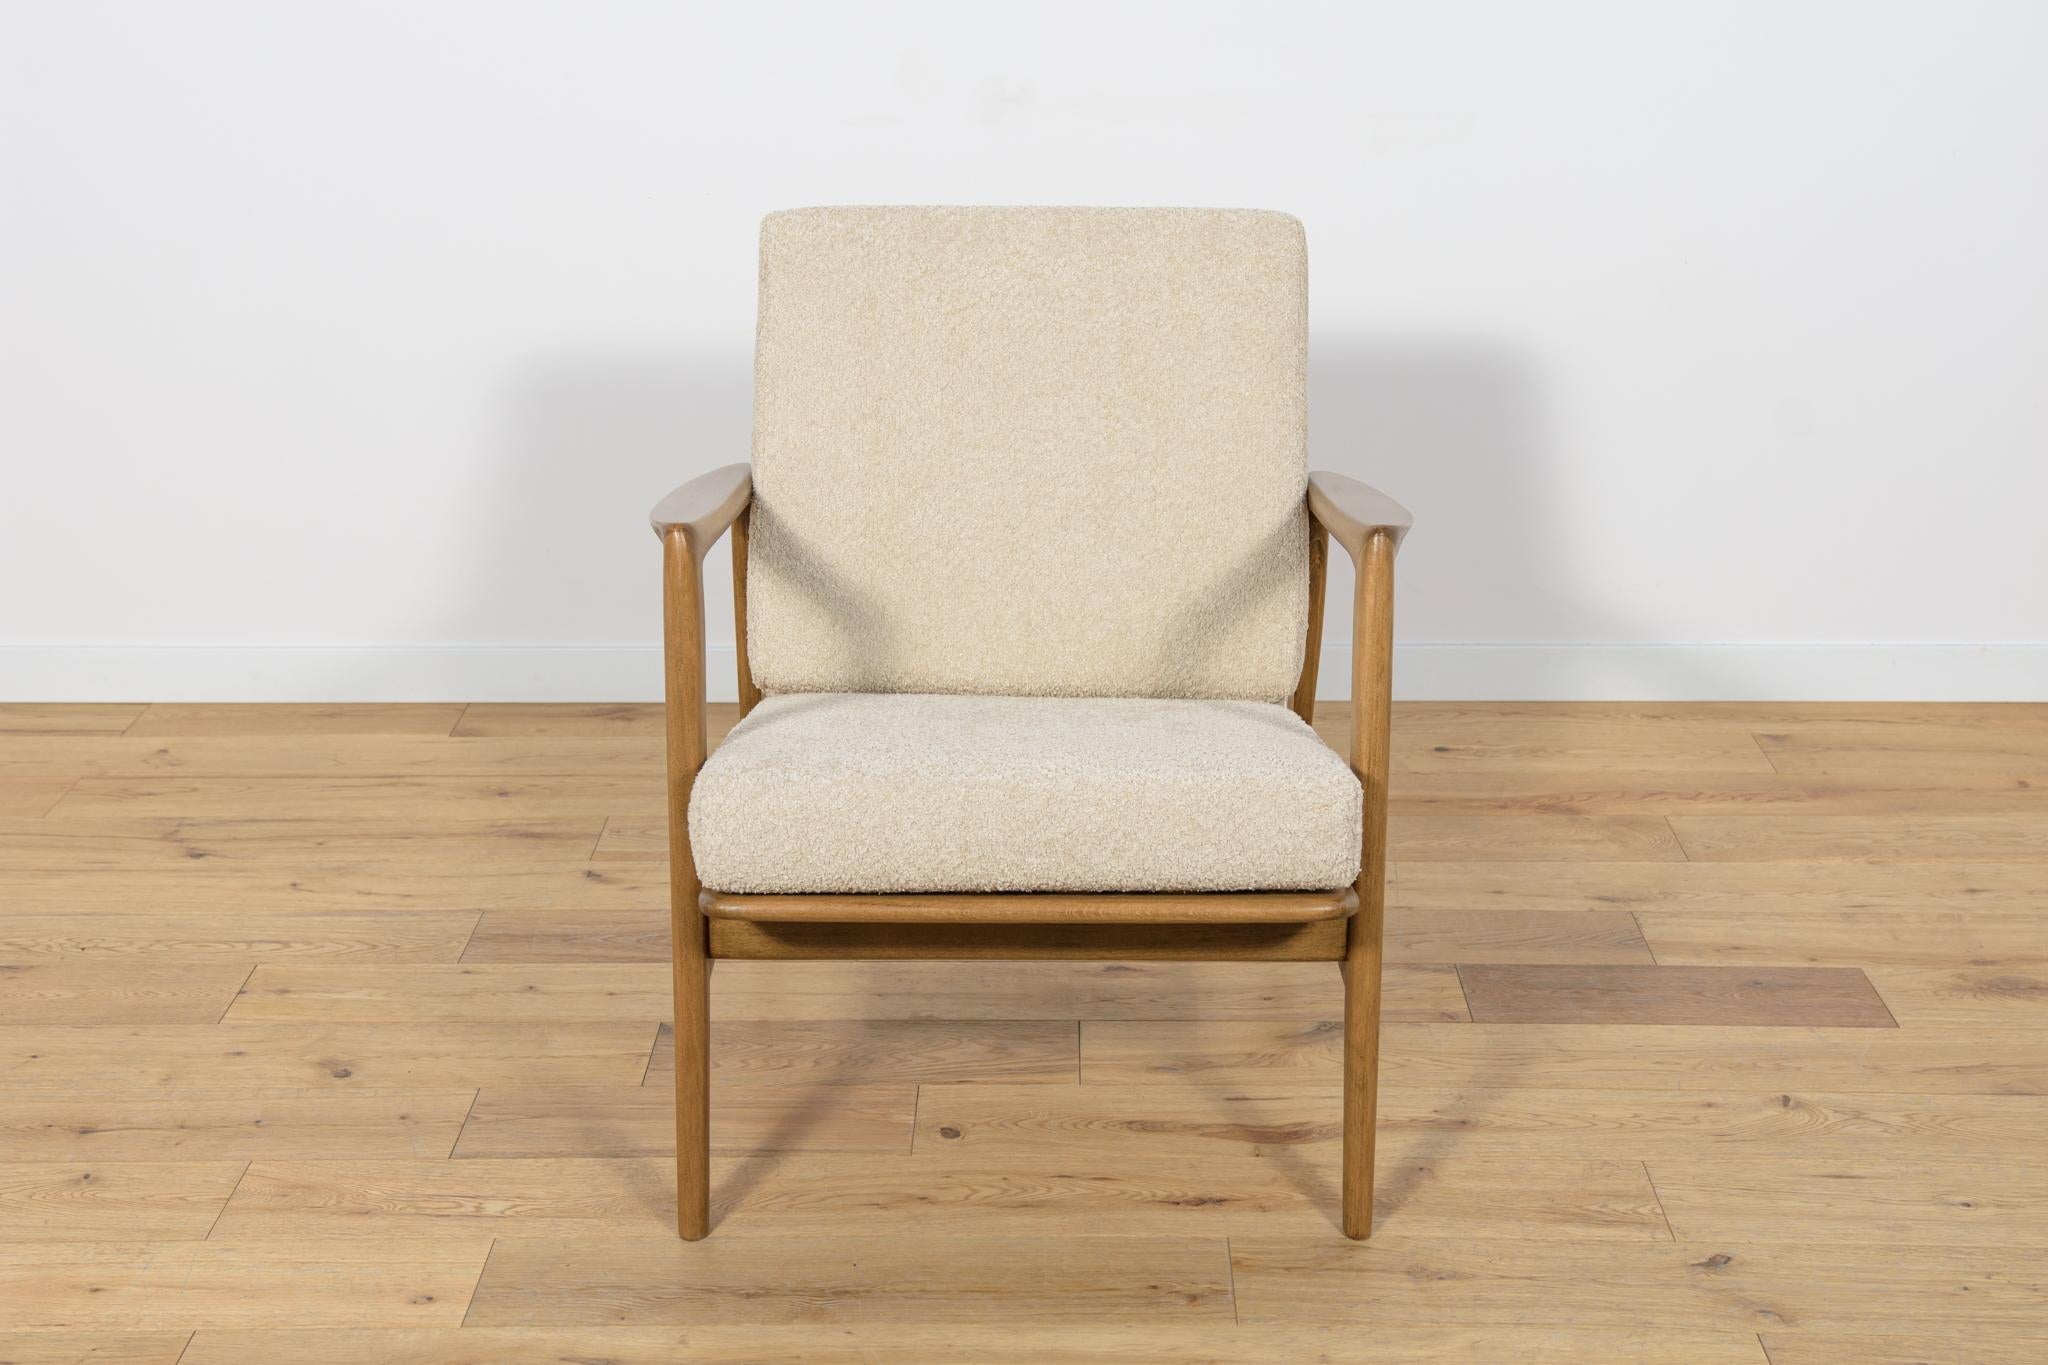 
The armchair was produced by the Polish company Swarzędzka Furniture Factory in 60s. Comfortable armchair with a unique form. Cushions replaced with new ones, upholstered in high-quality boucle typ fabric in a cream color. The beech frame has been